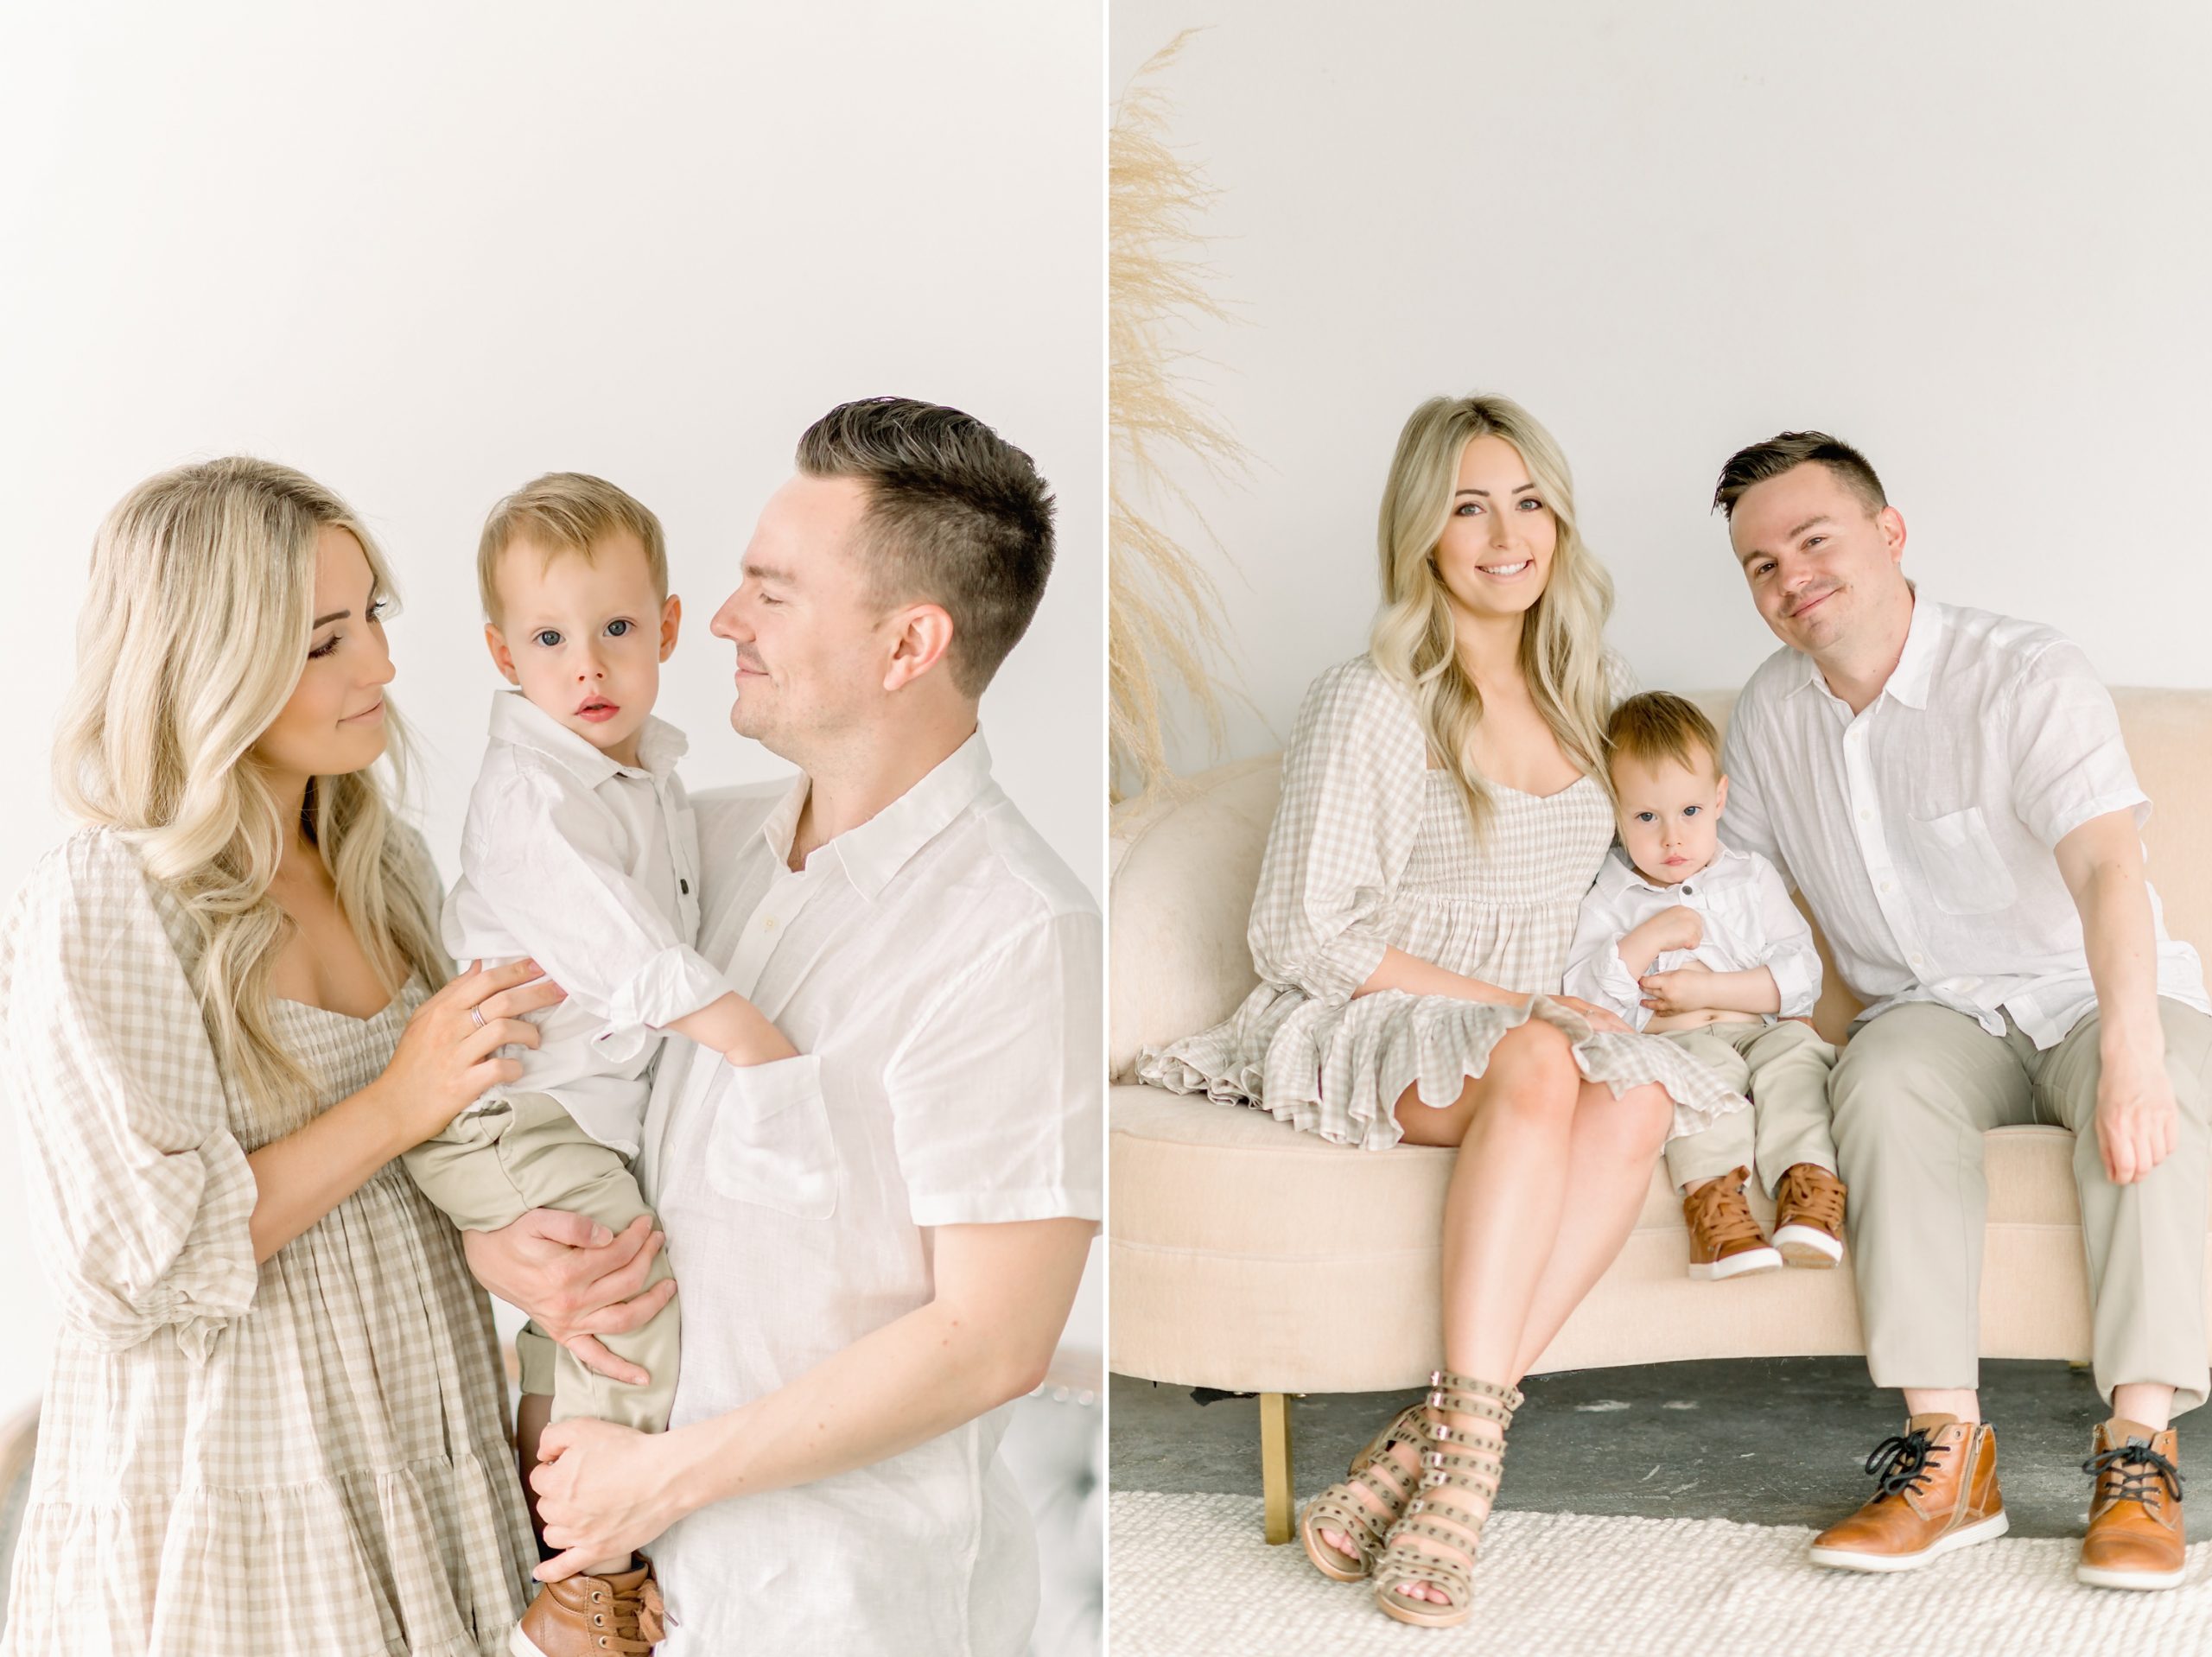 A young family of 3 gets updated family portraits done in a bright white studio in Denver, Colorado.